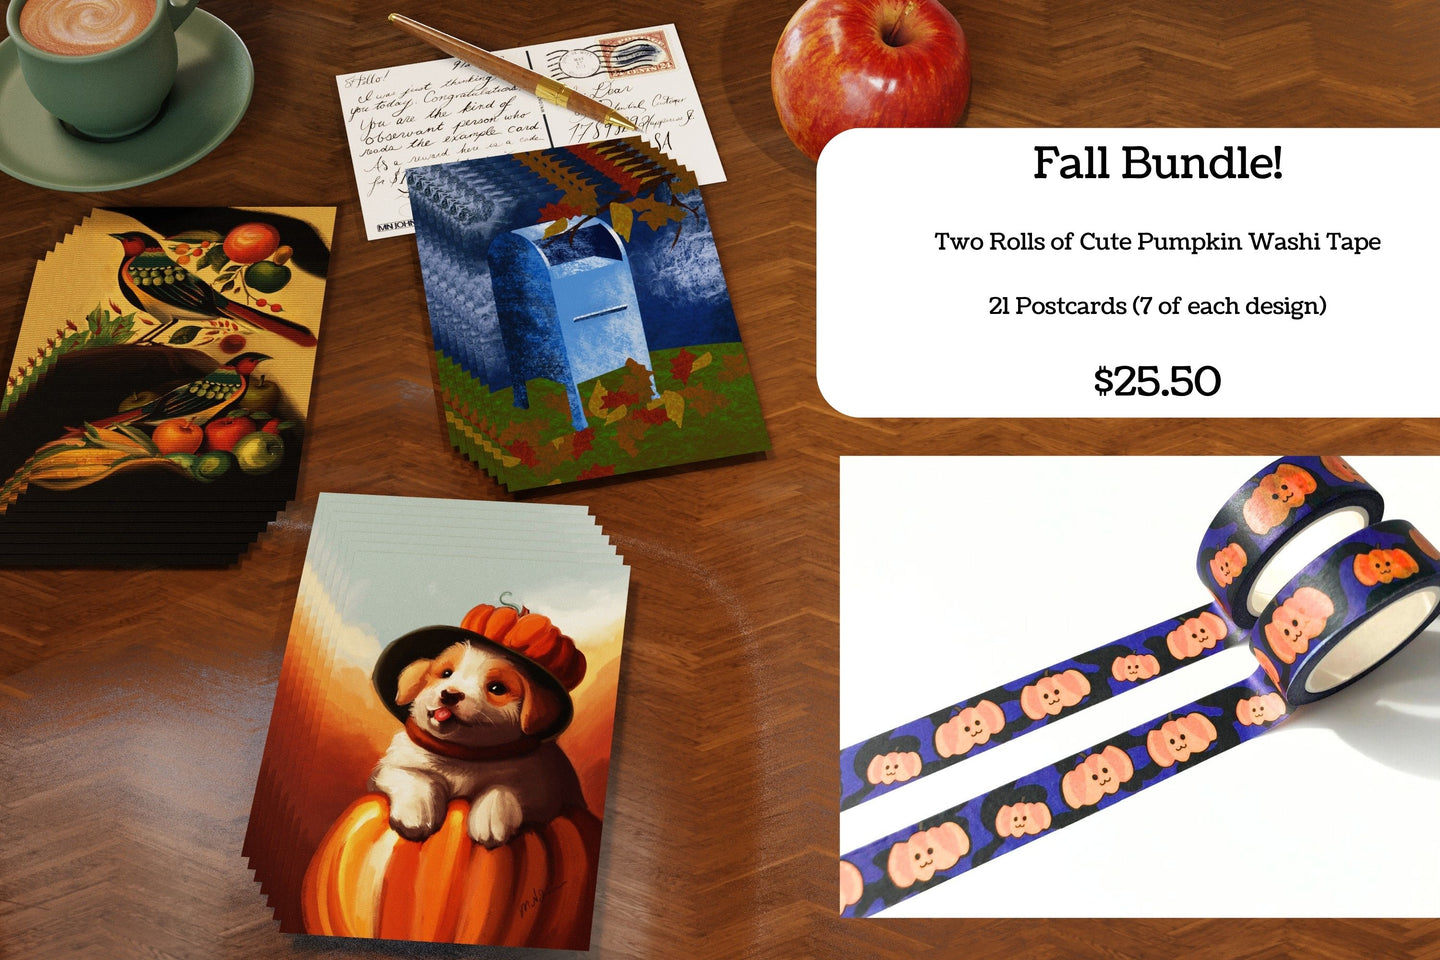 Fall Bundle: 21 Autumn Postcards and Two Rolls of Washi Tape